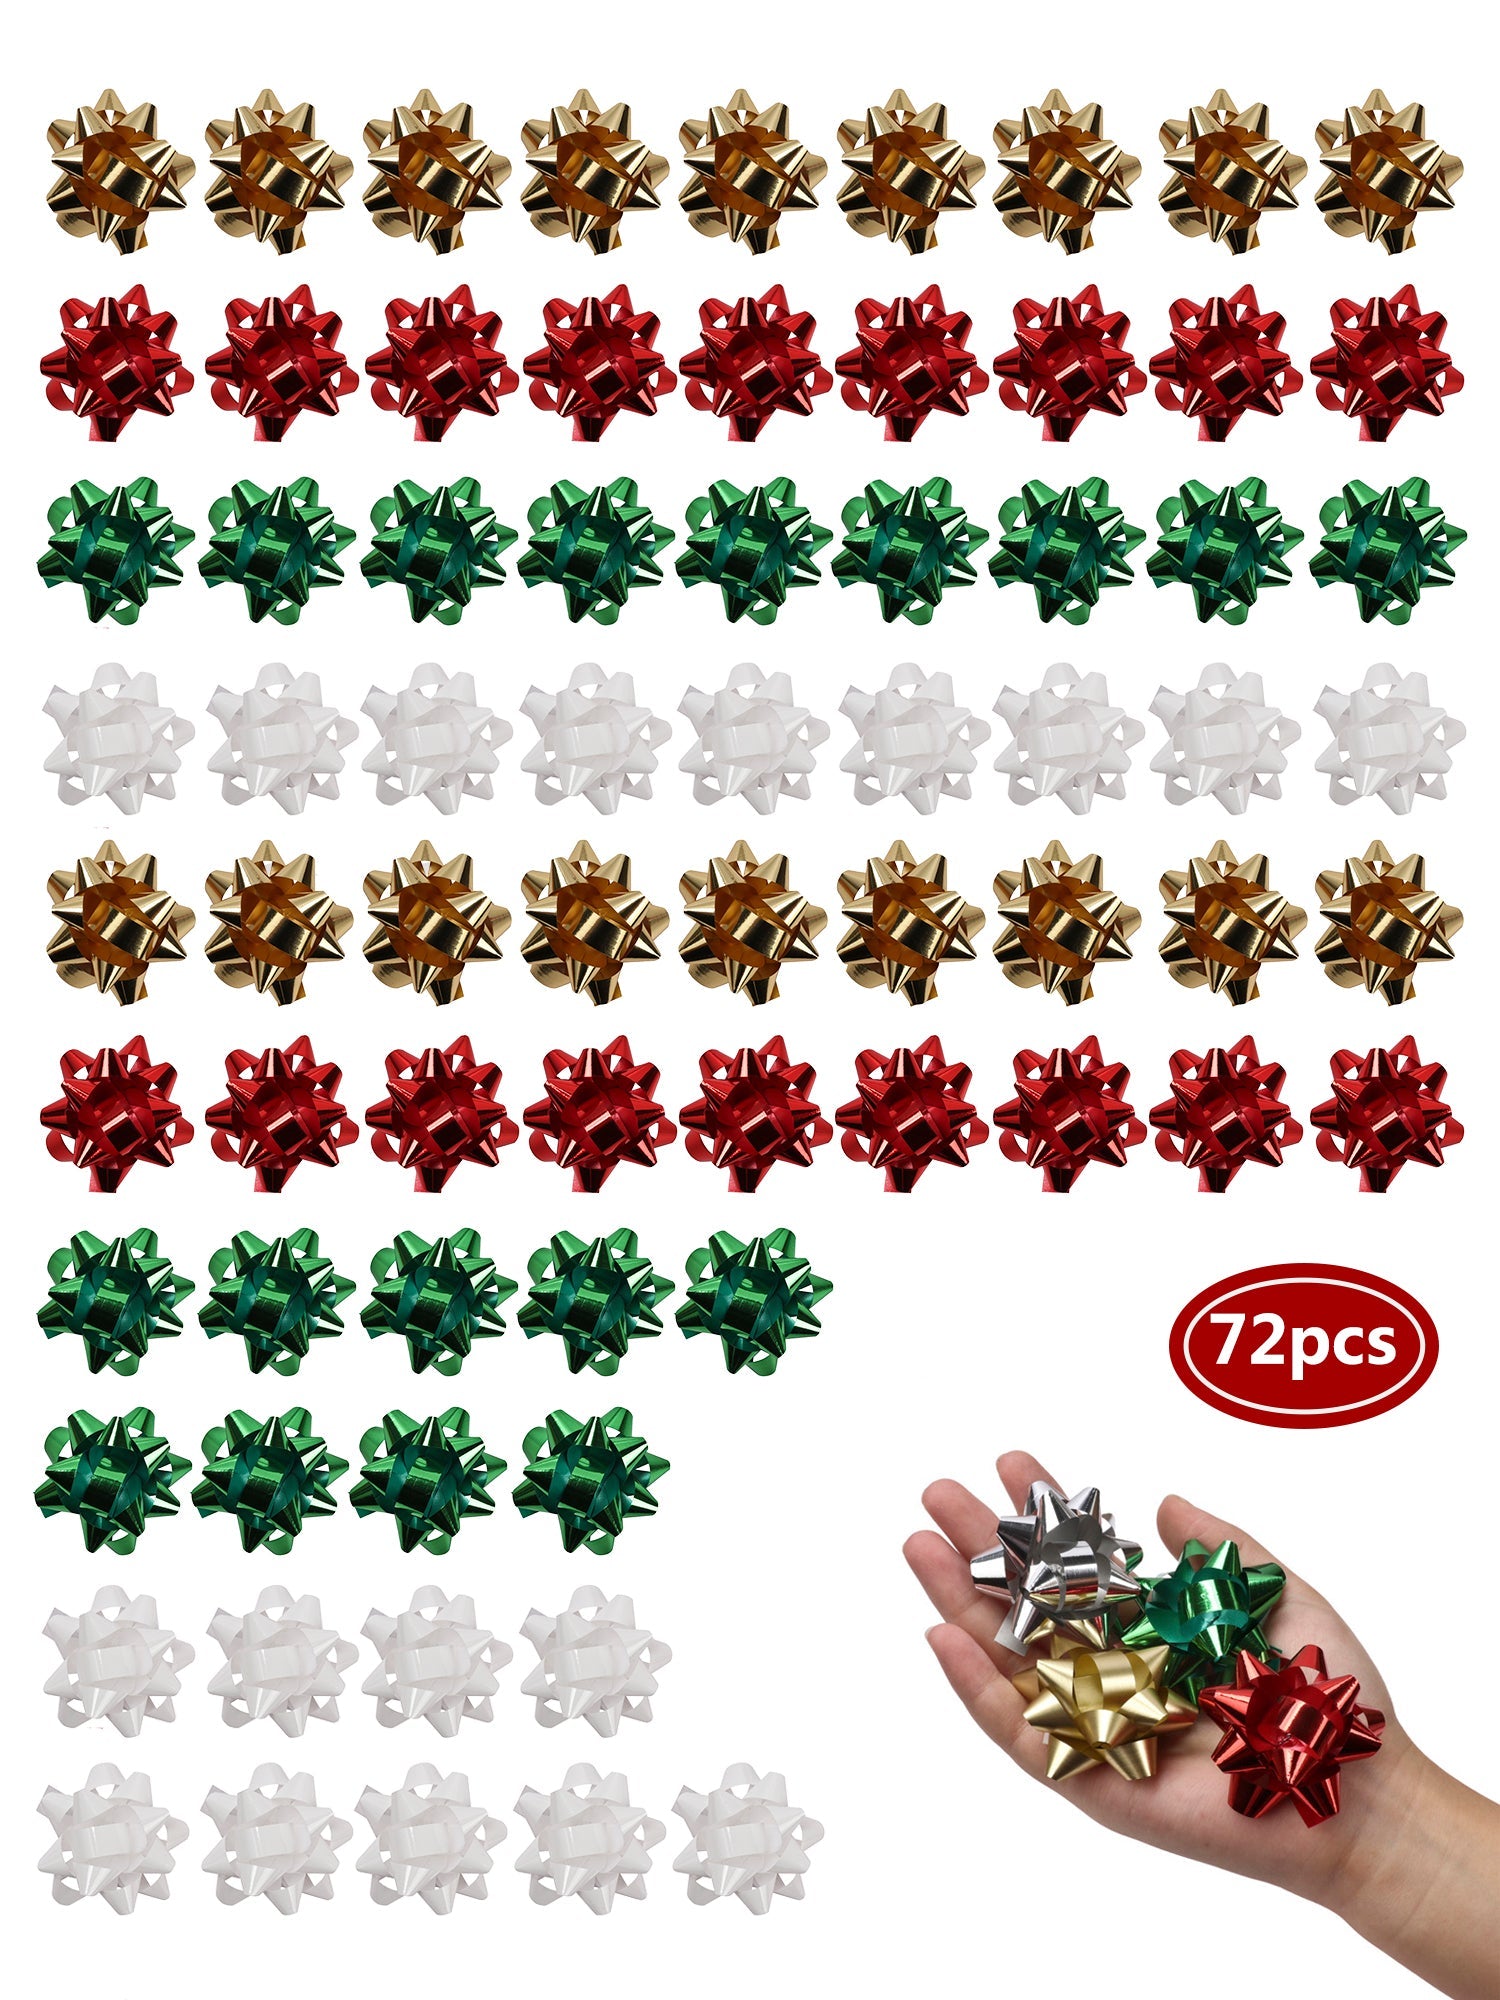 2" Christmas Star Gift Bow Bundle - Green/Red/White/Gold - 72 pcs